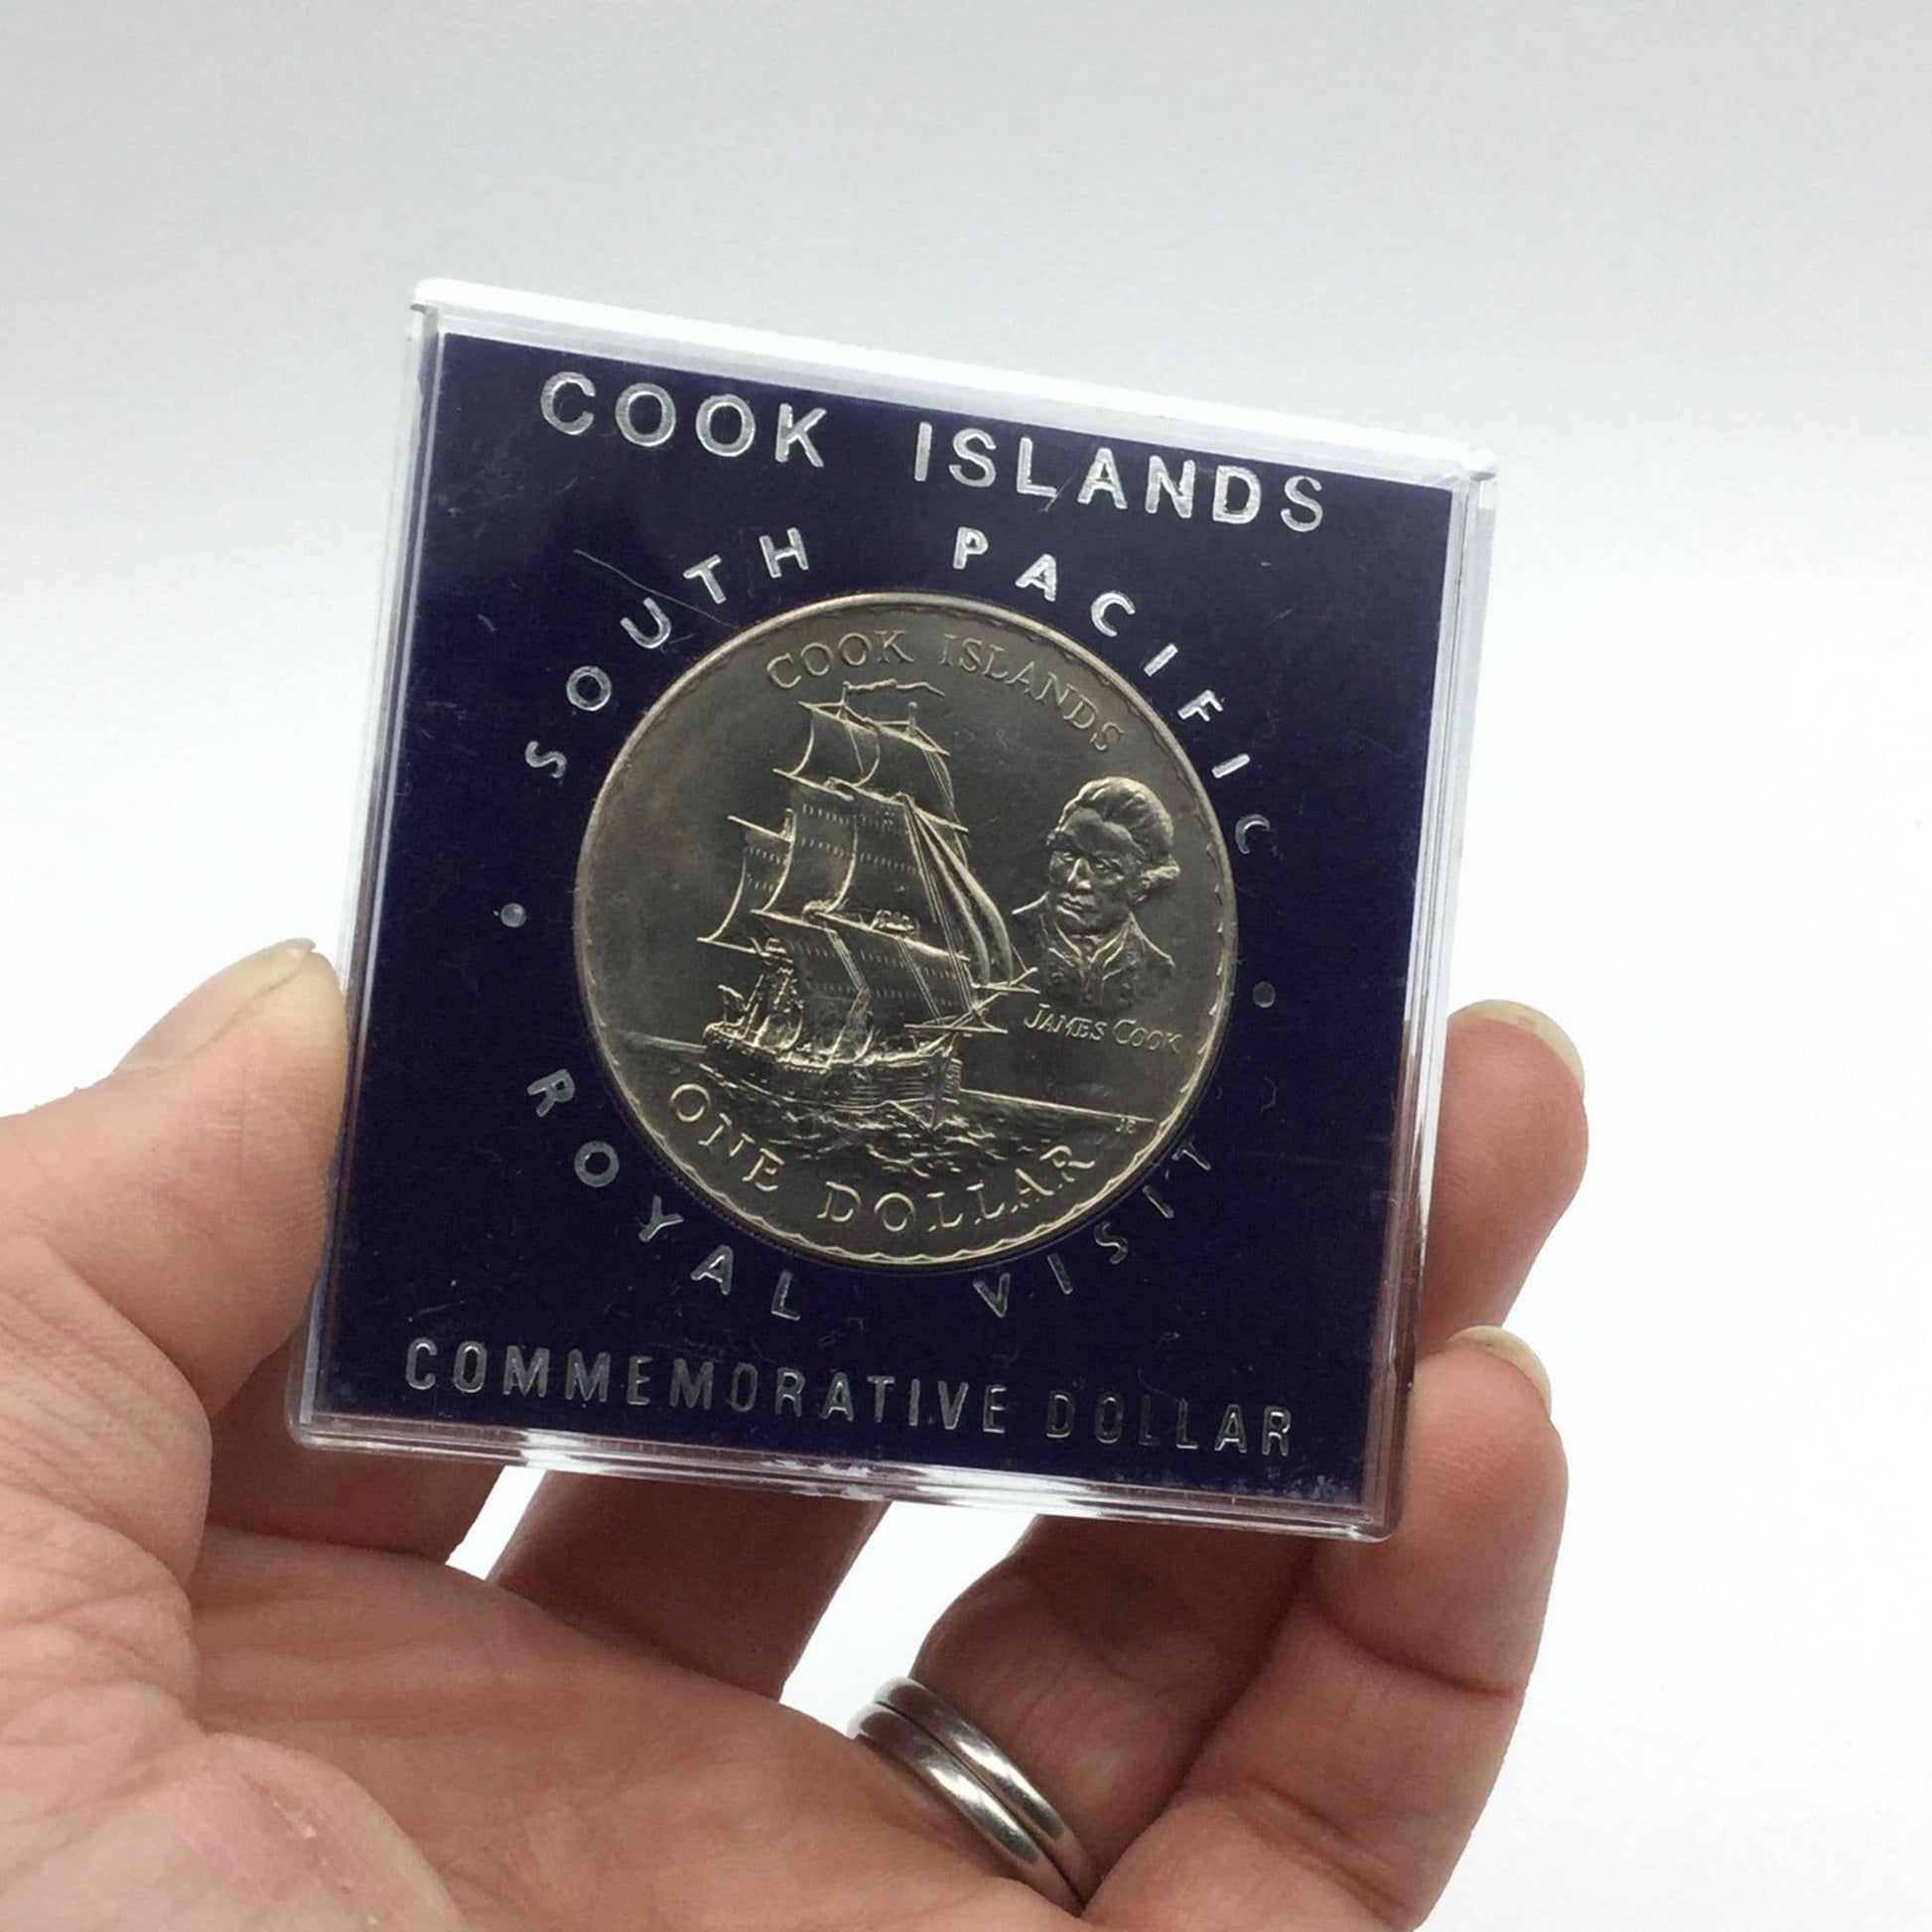 Cook Islands dollar coin with a ship on it in a blue case held in a hand